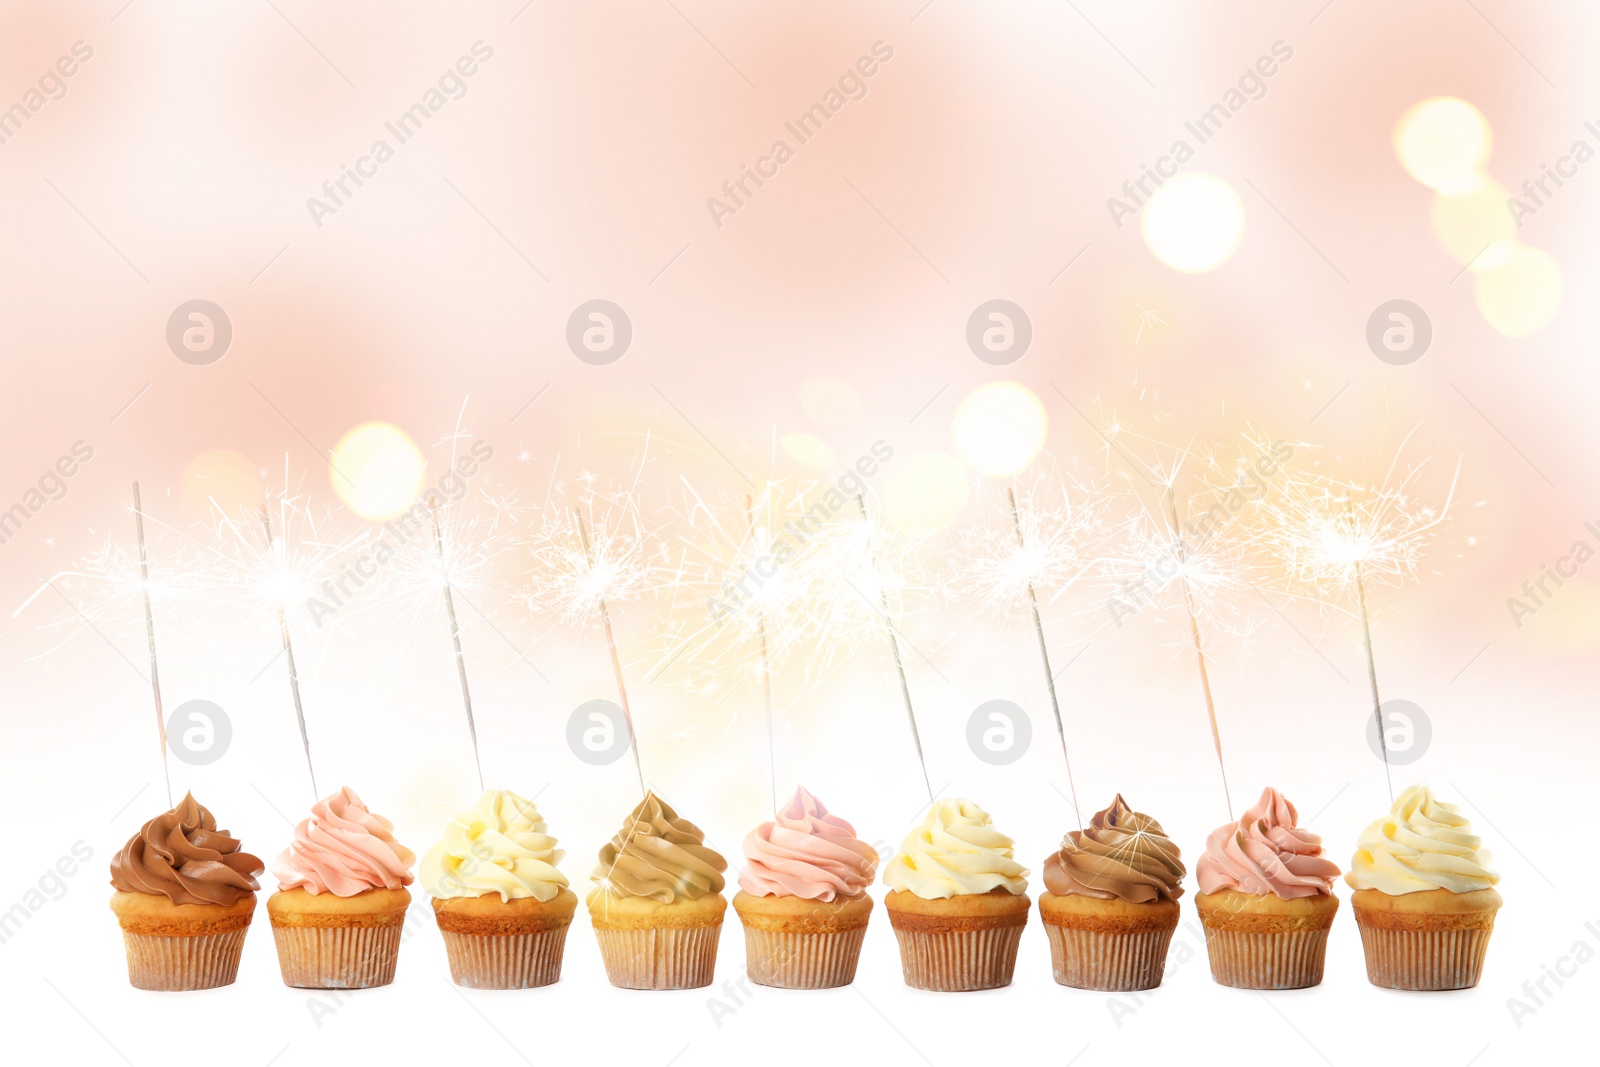 Image of Birthday cupcakes with sparklers on light background